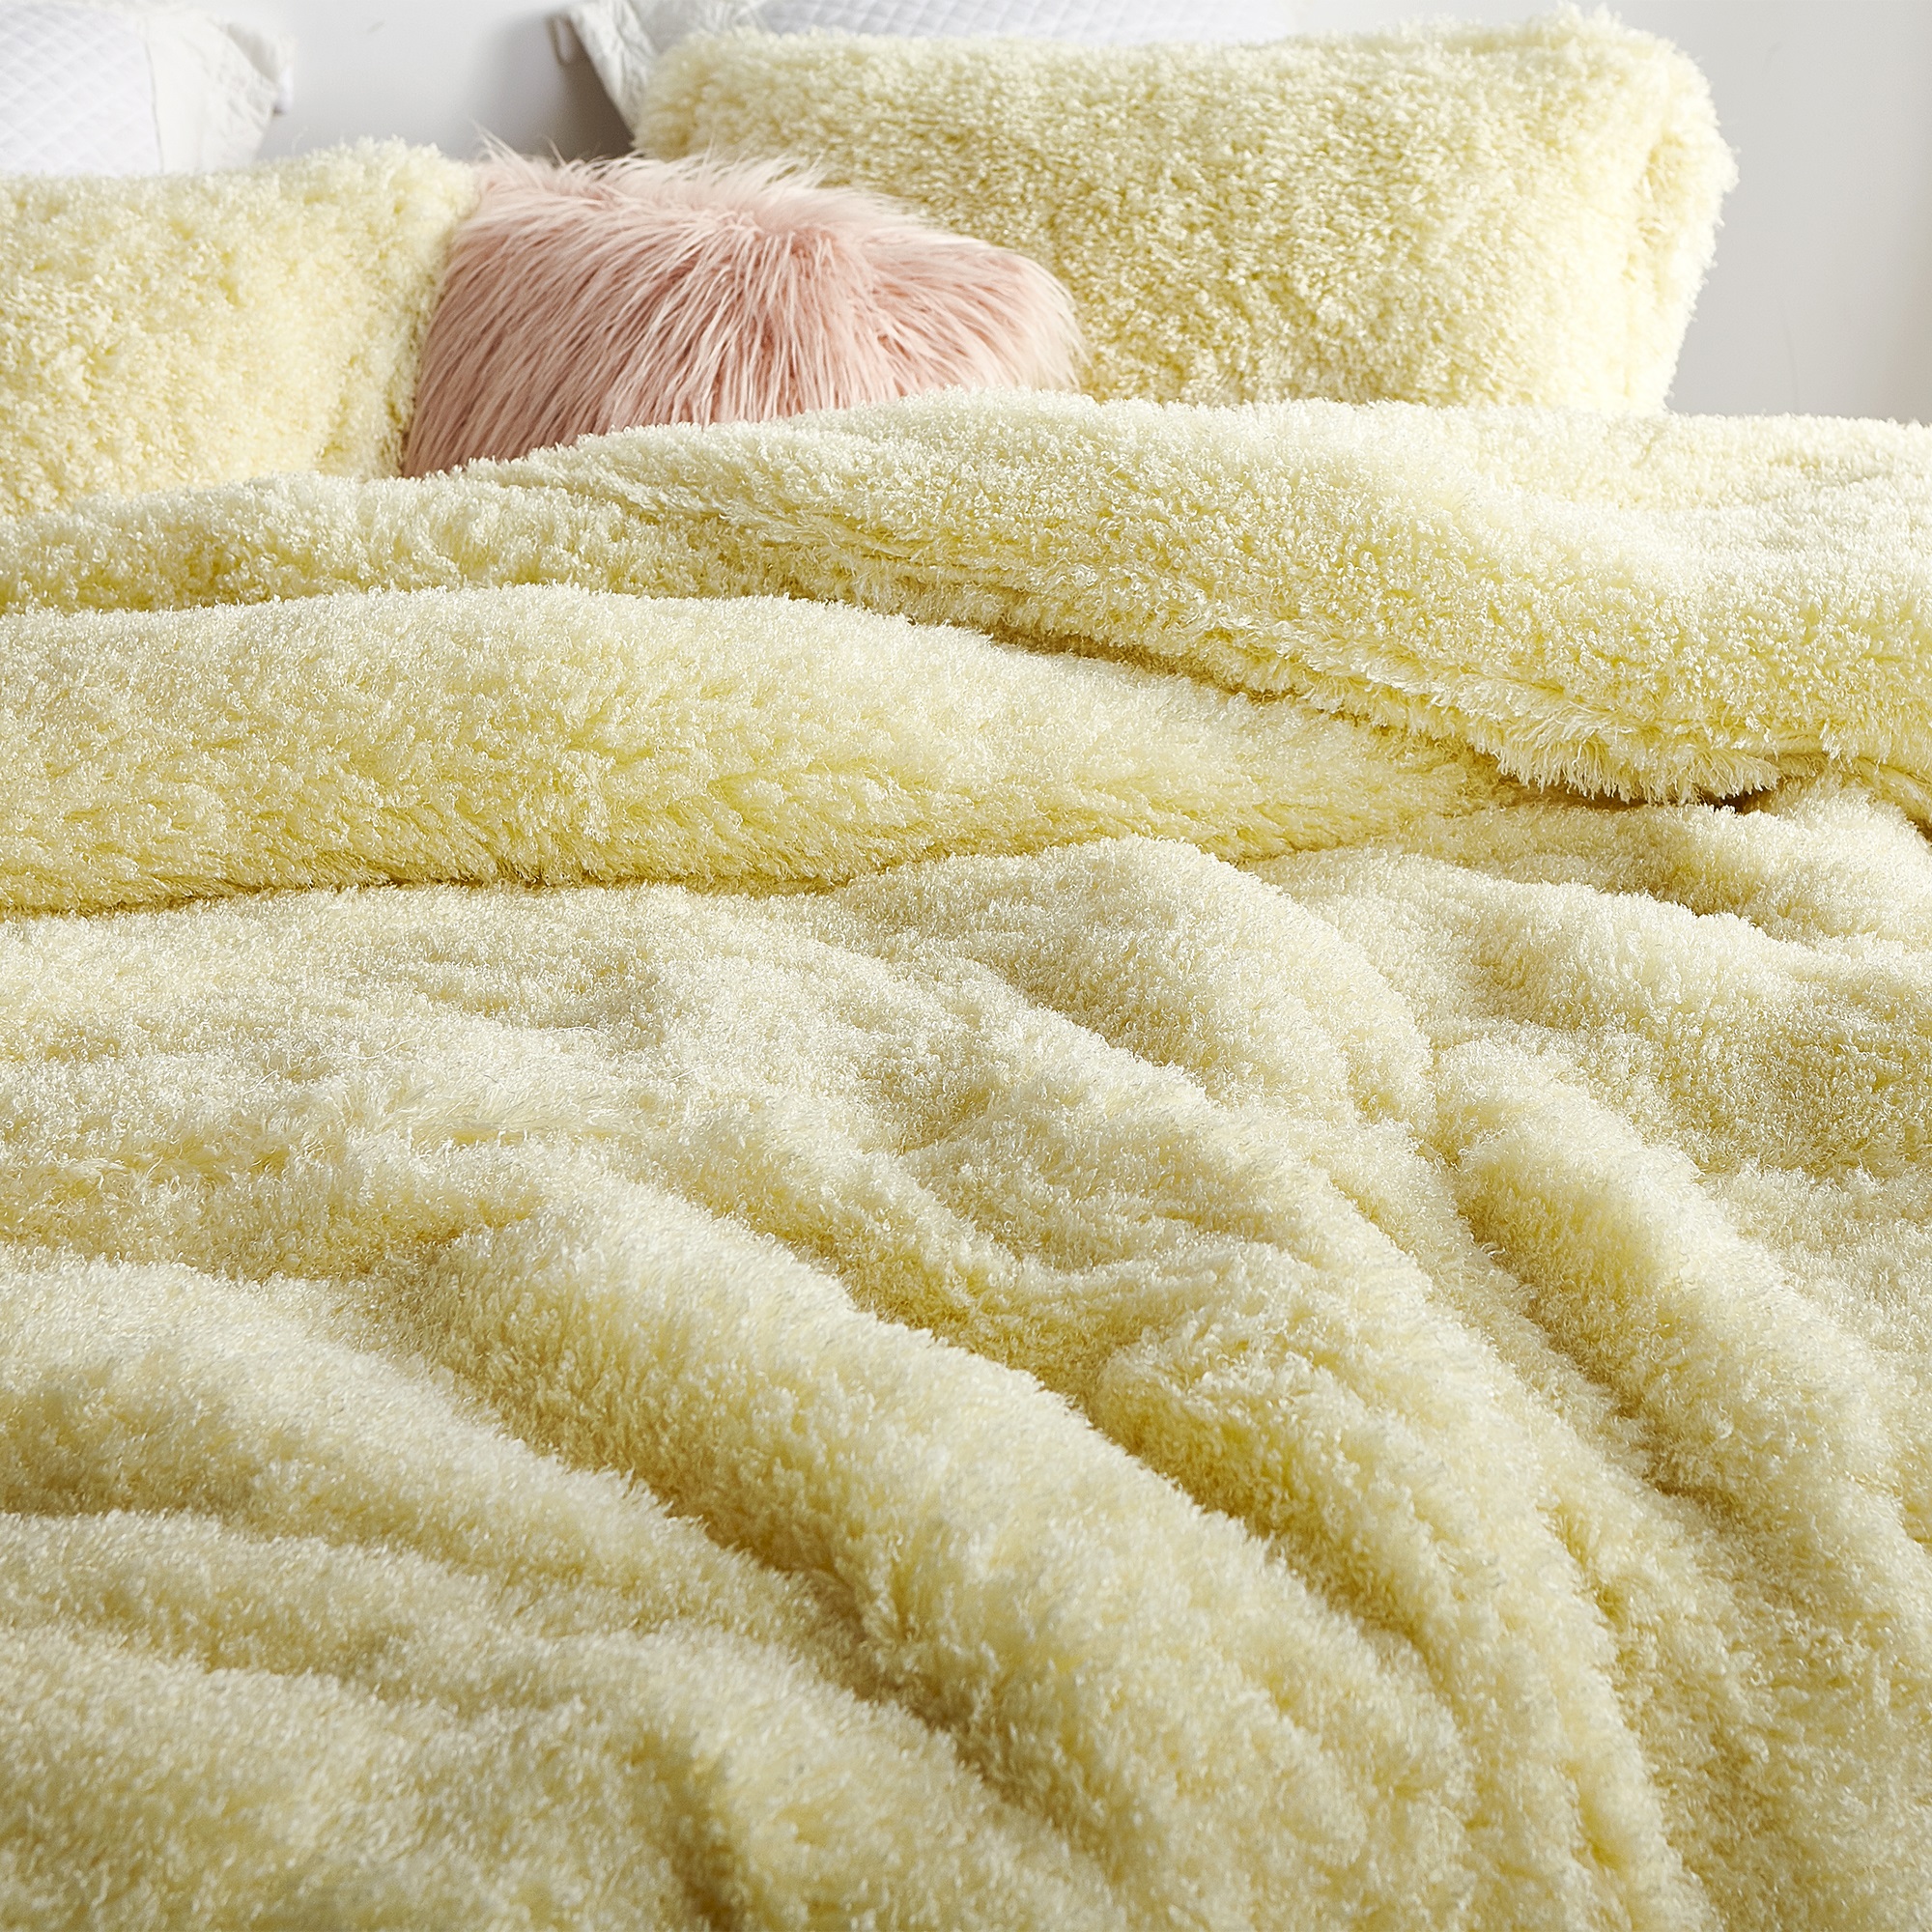 Fro Shizzle Dizzle - Coma Inducer Oversized Comforter - Pear Sorbet